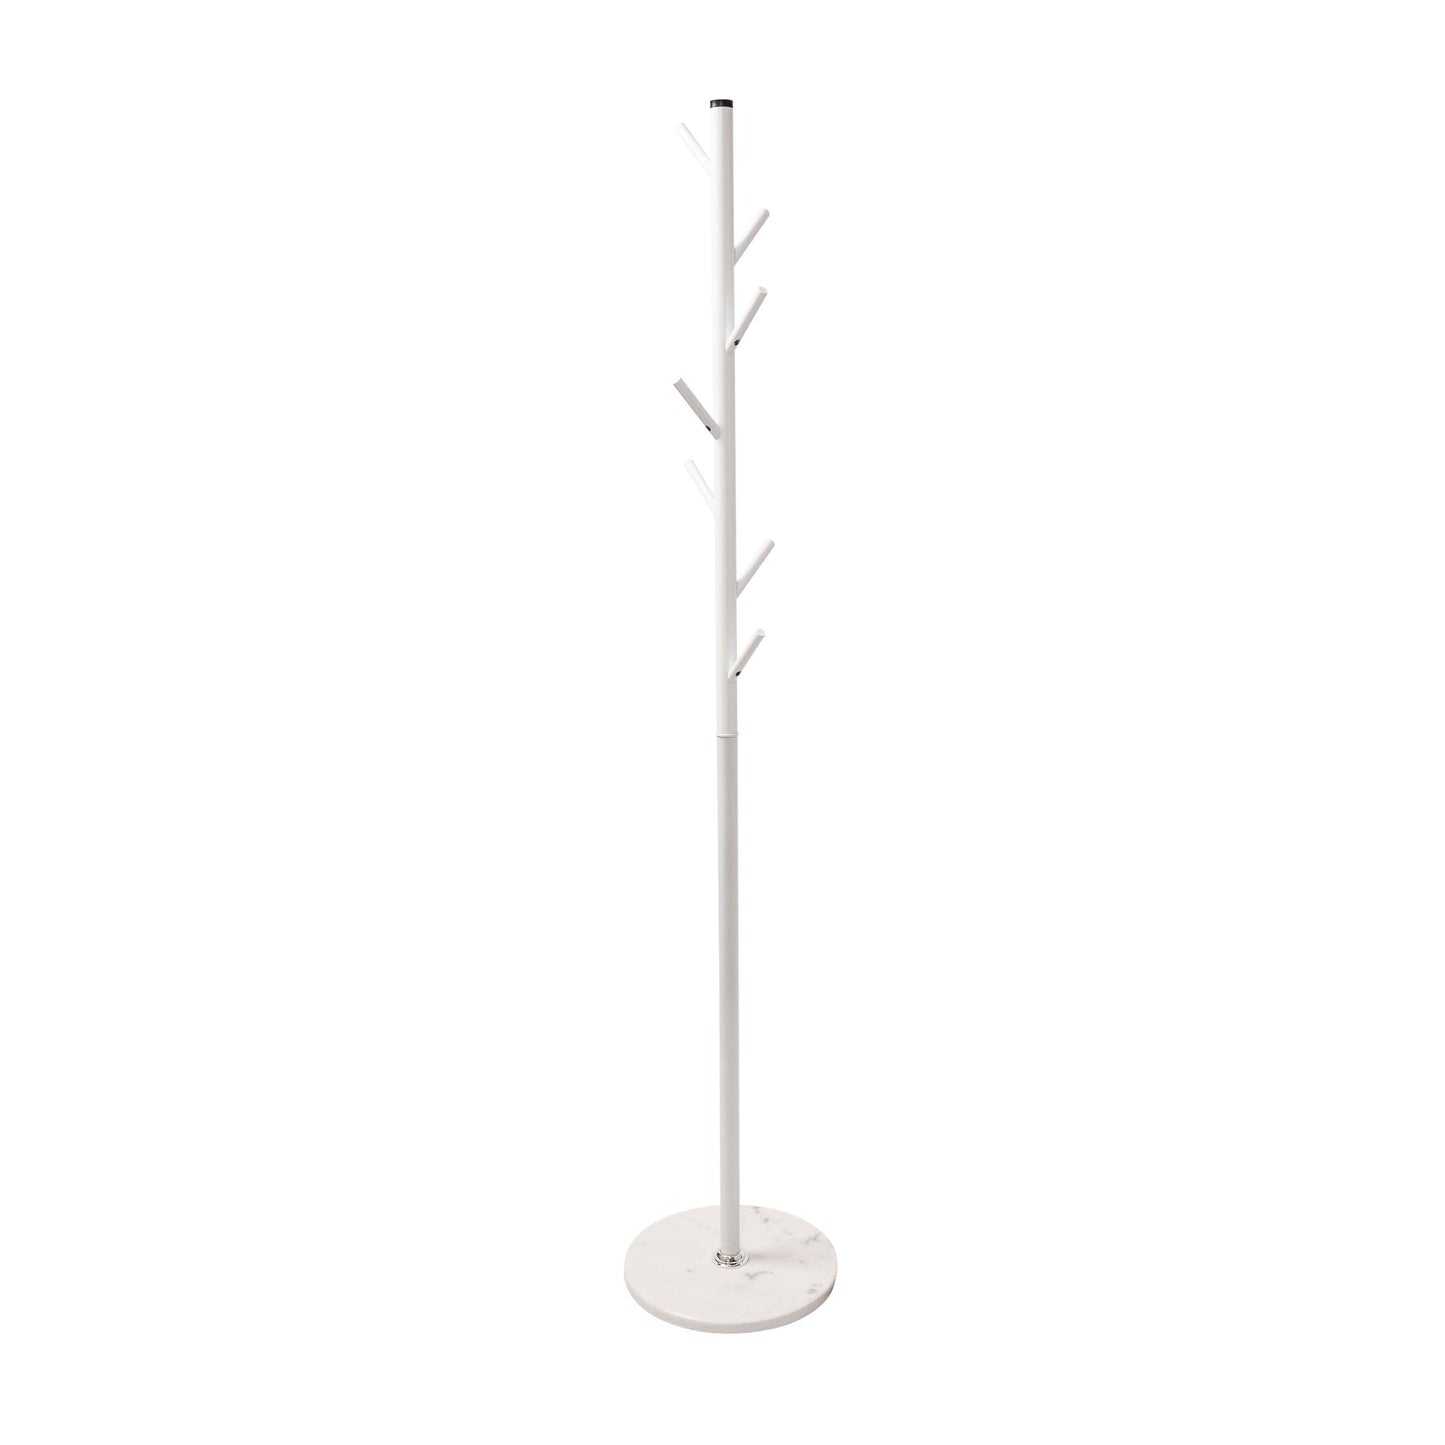 Metal Coat Rack Stand Matte White With Heavy Duty Metal Pole & 8 Aluminium Pegs - Solid Heavy Marble Base - Hangersforless